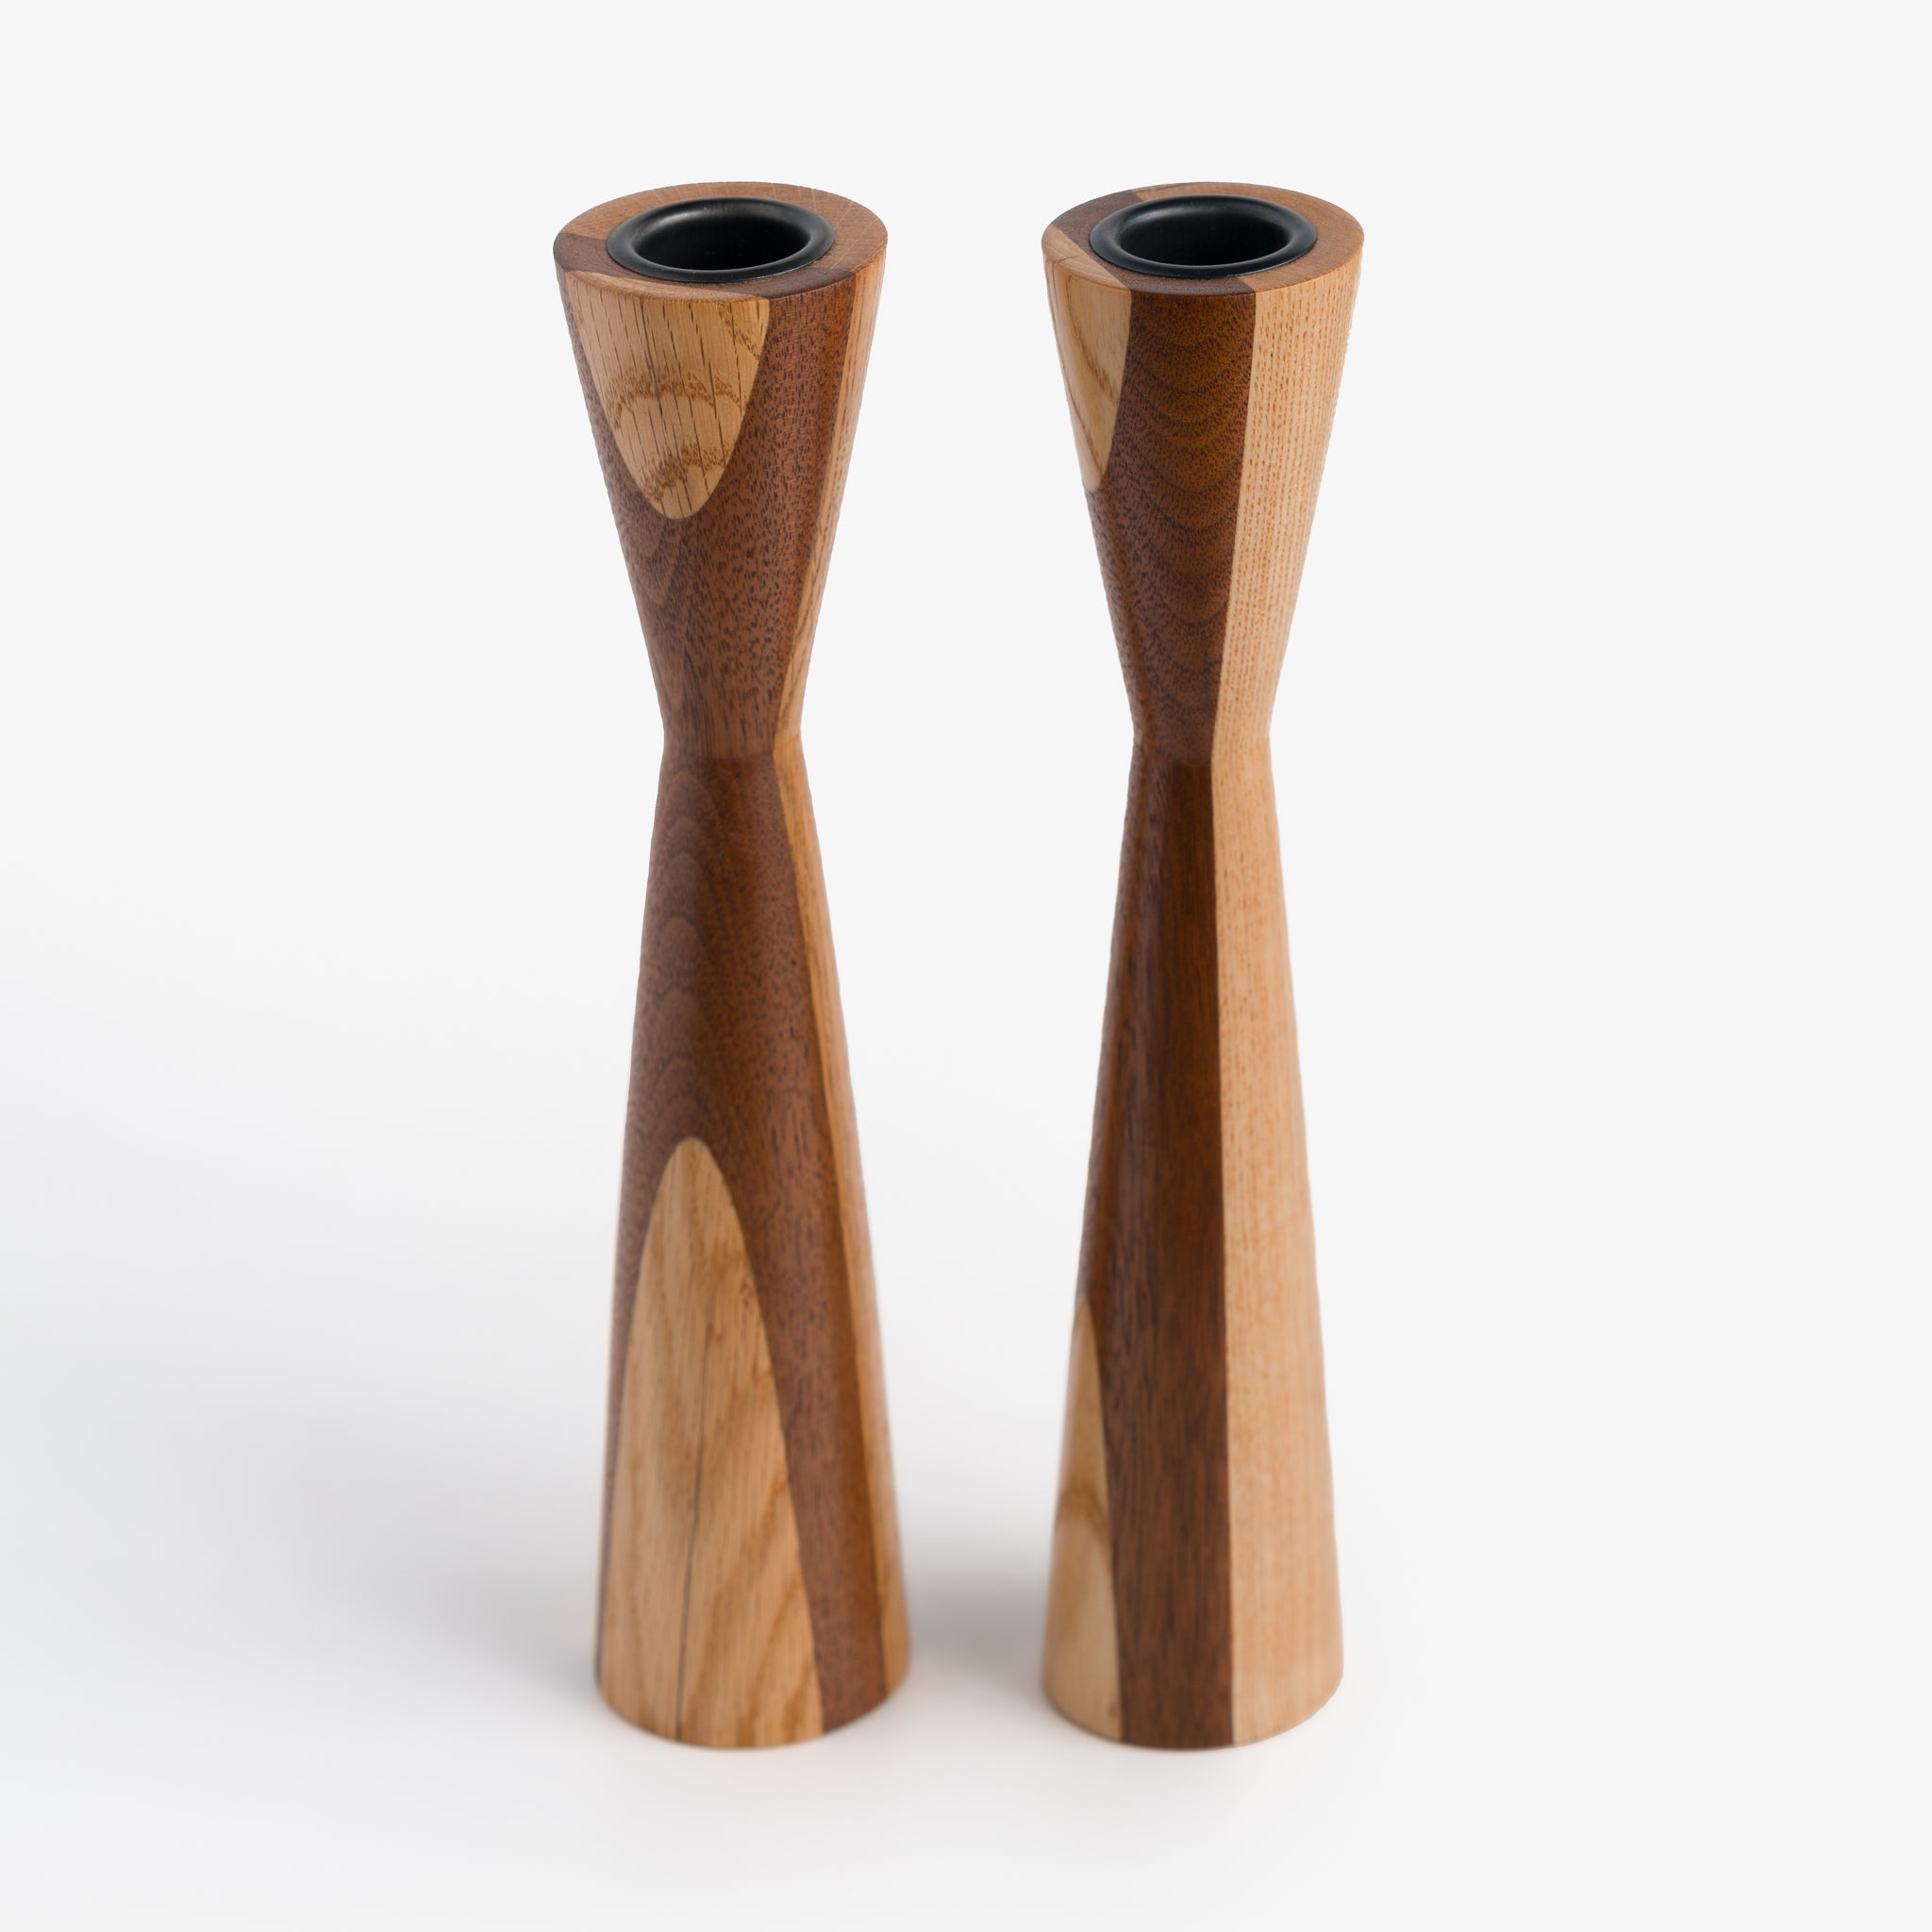 Pair of Triangular Hourglass Candle Holder by Robert Christman